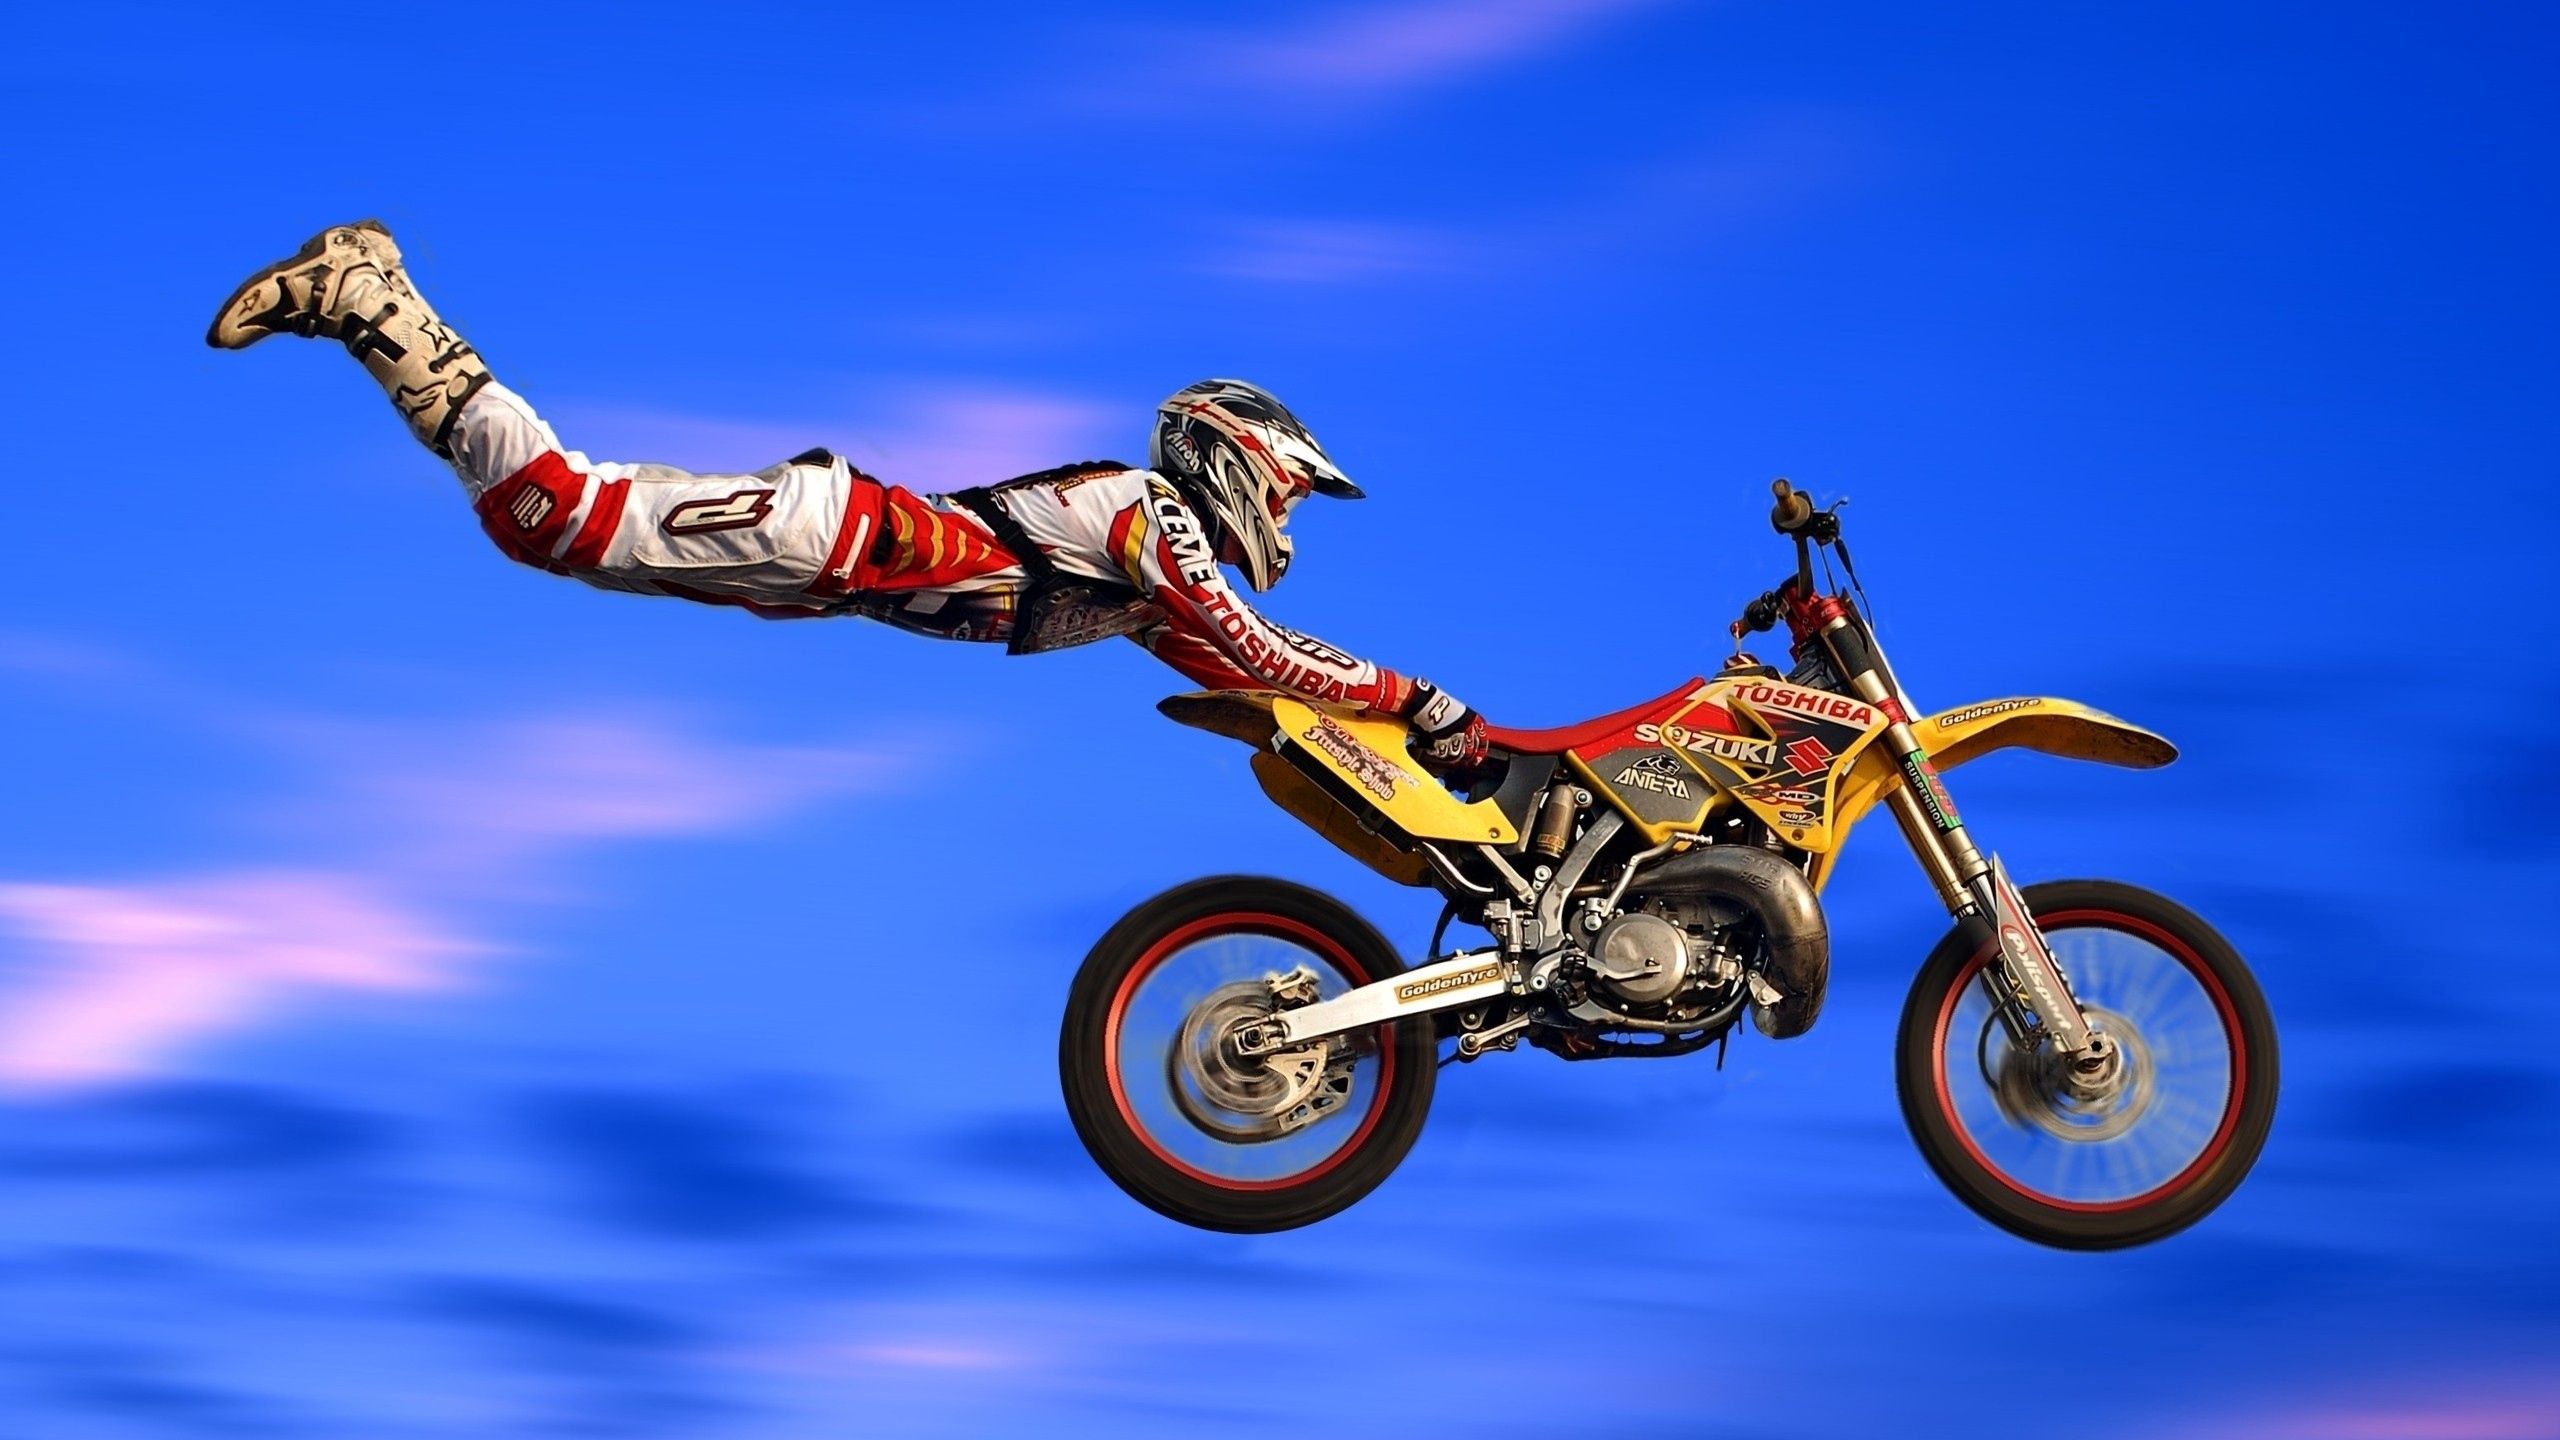 extreme, motorcycles, flight, motorcycle, bounce, jump, trick, costume, danger cell phone wallpapers